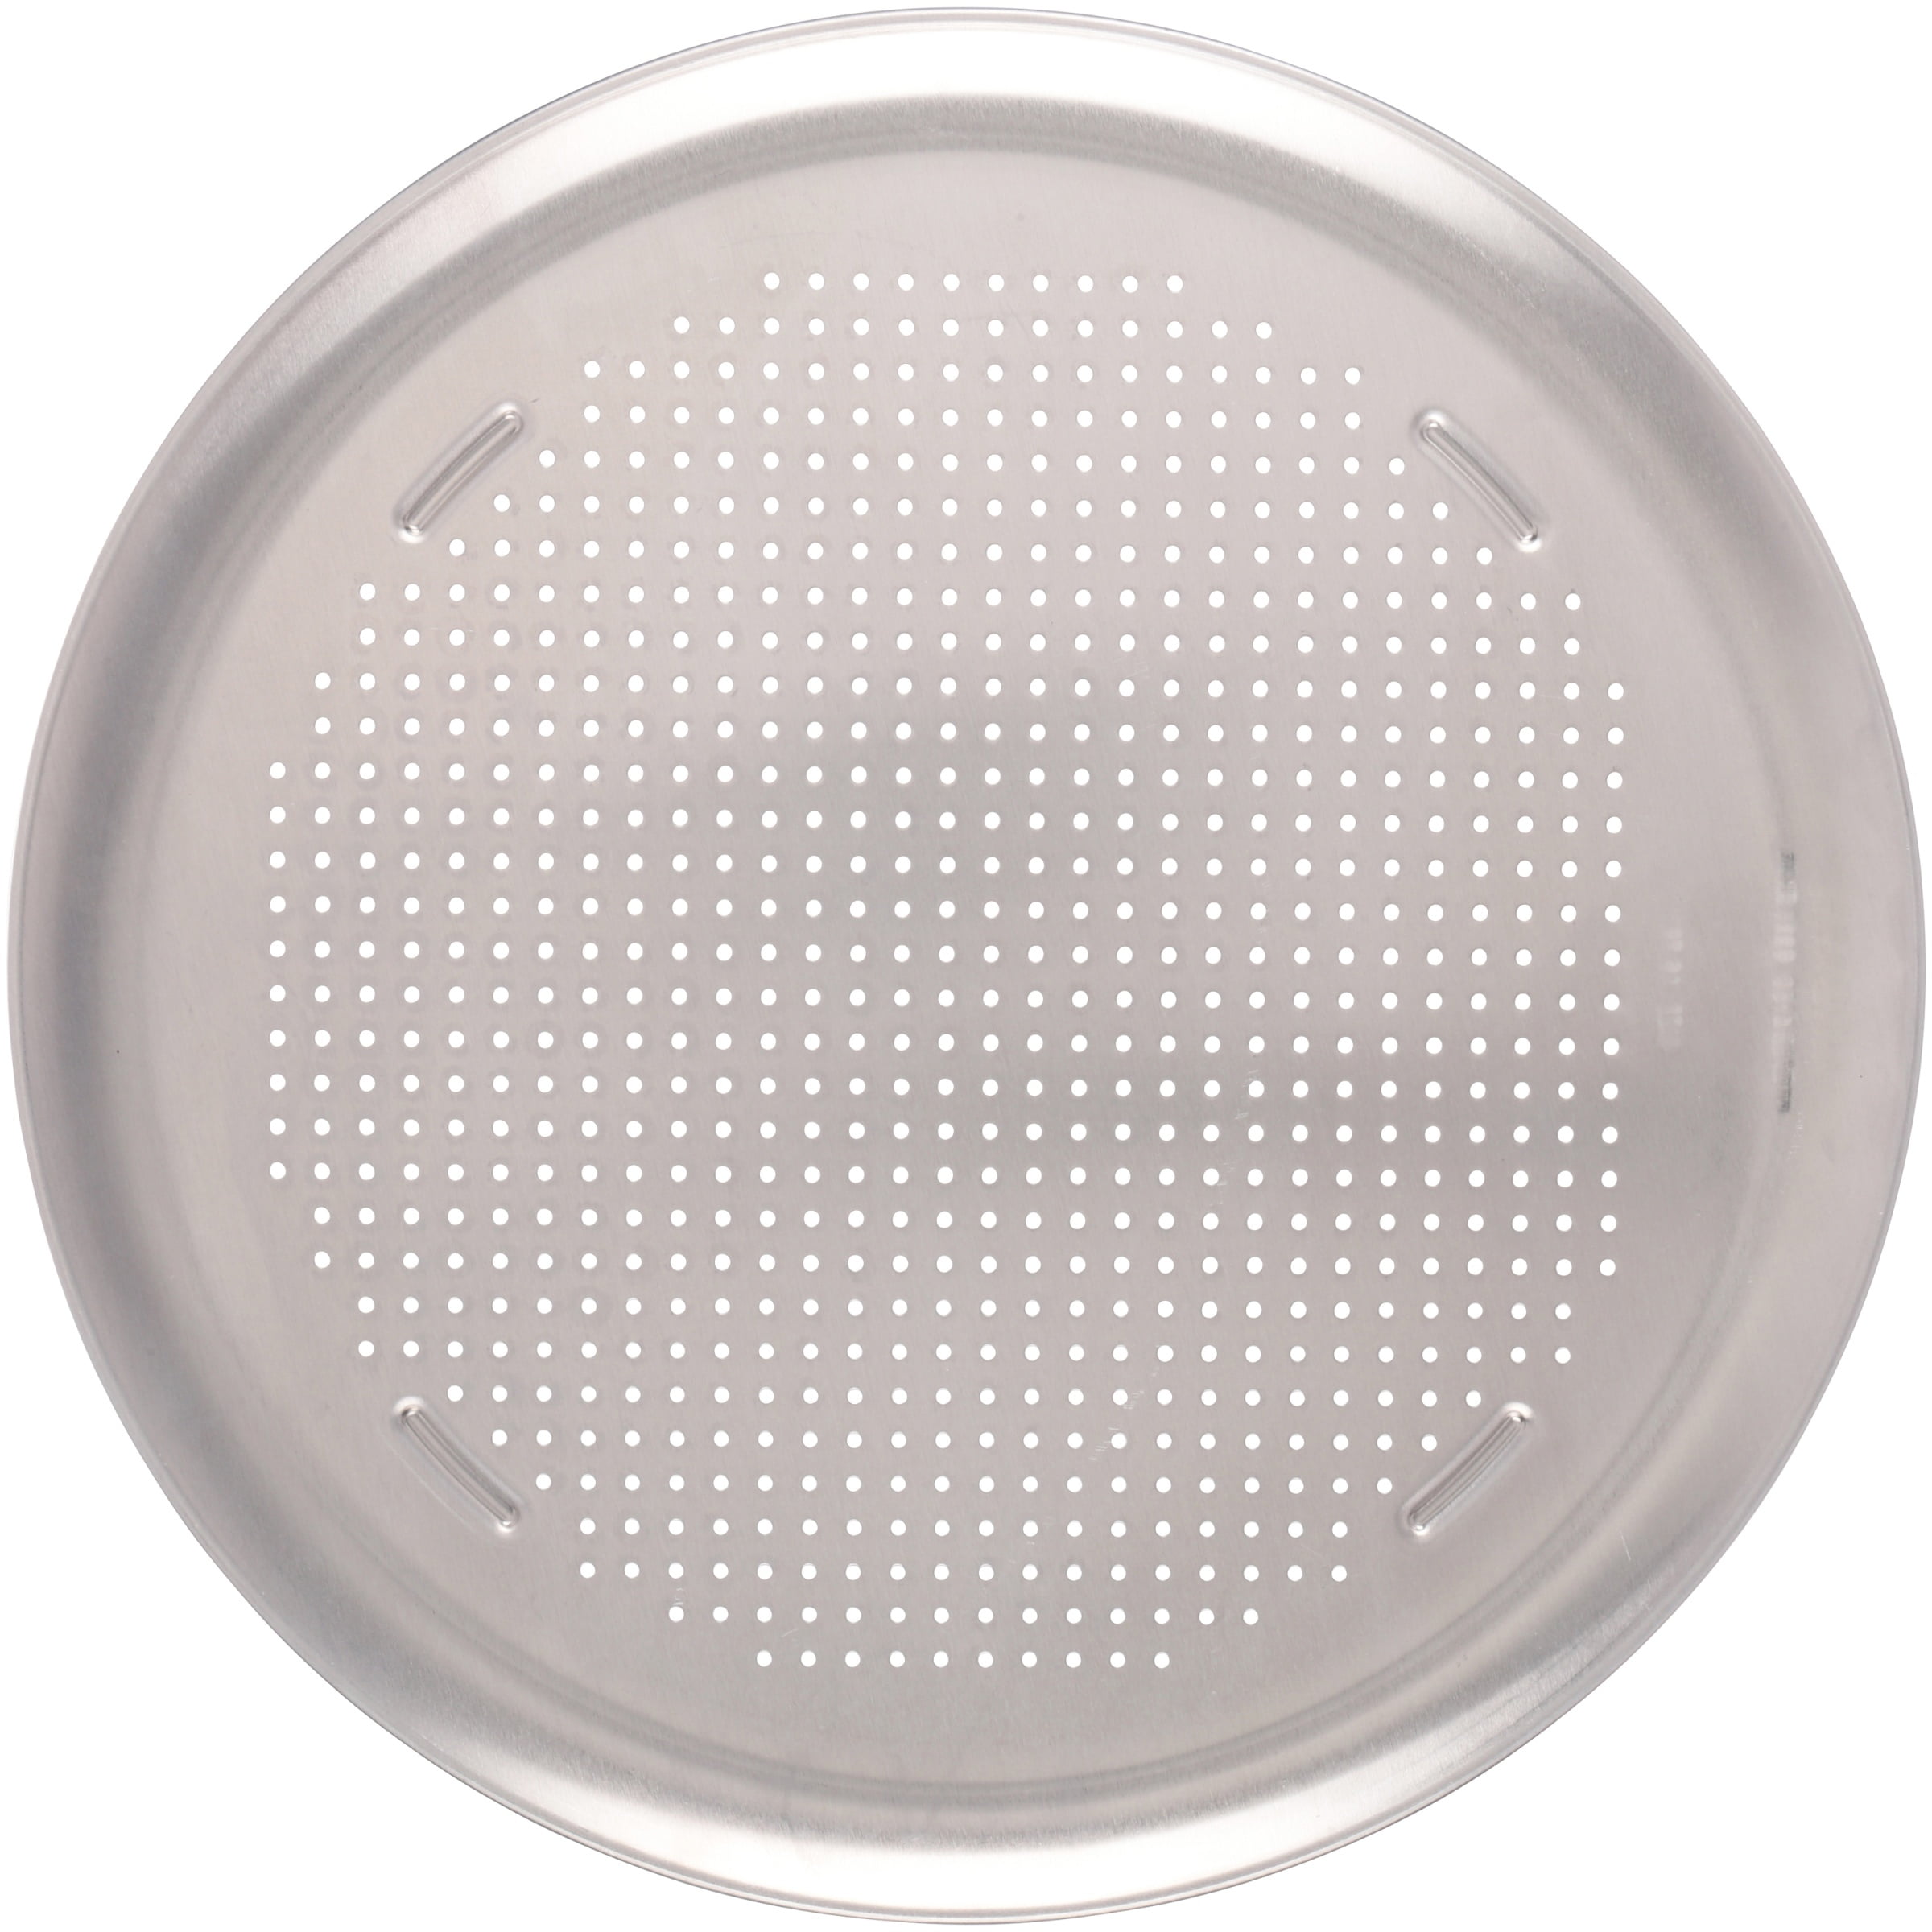 L x 15-13/16 in W Pizza Pan  Silver Airbake  15-3/4 in 